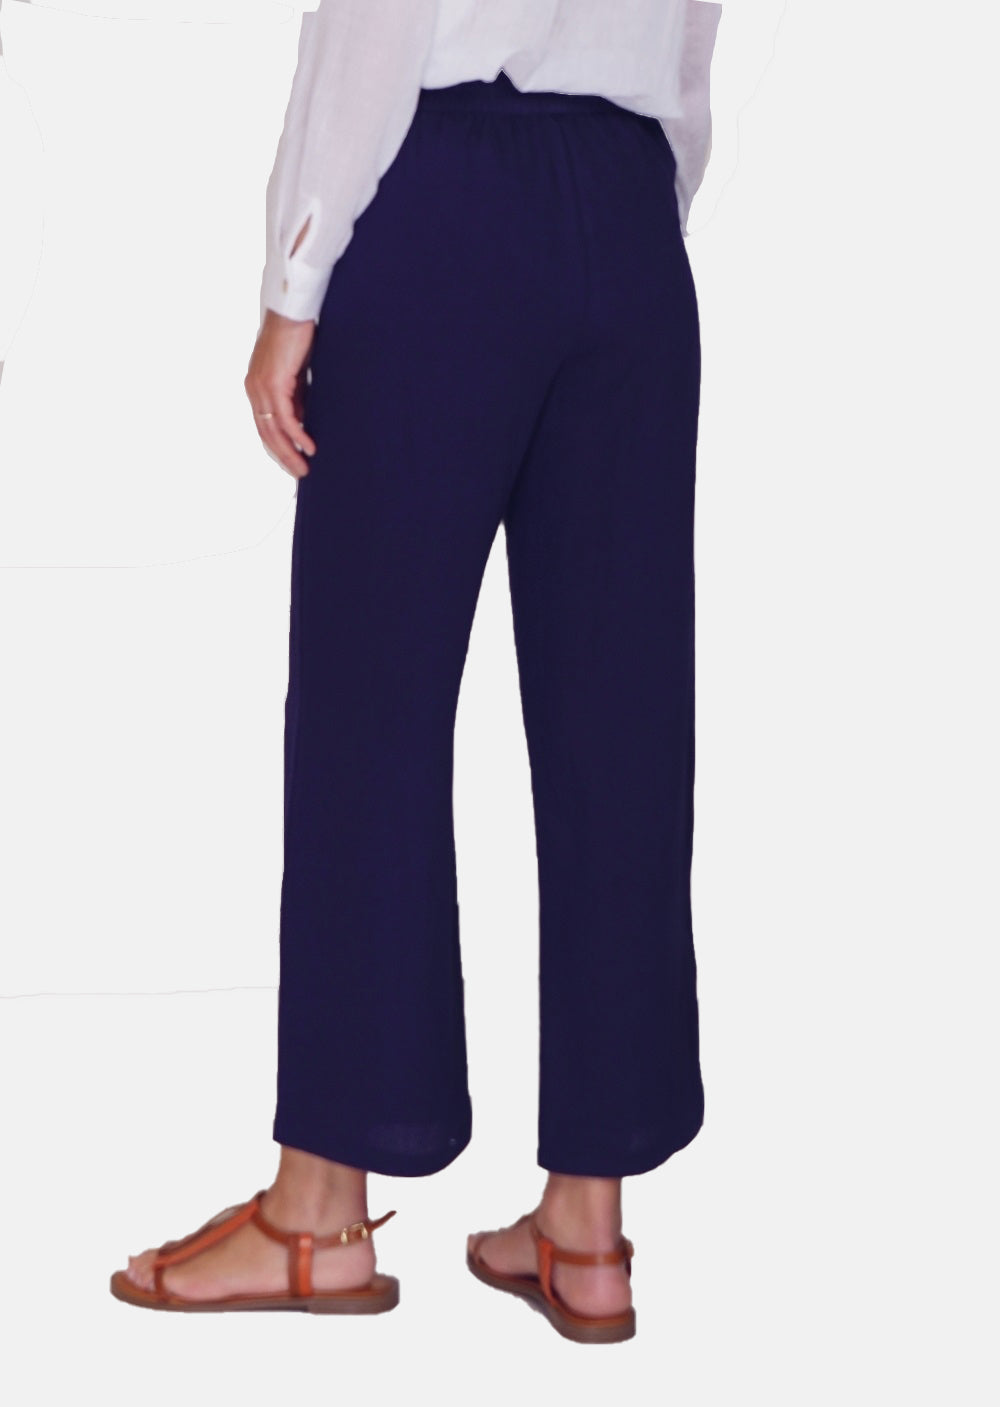 Wide pants with fancy belt zip closure and high waist button